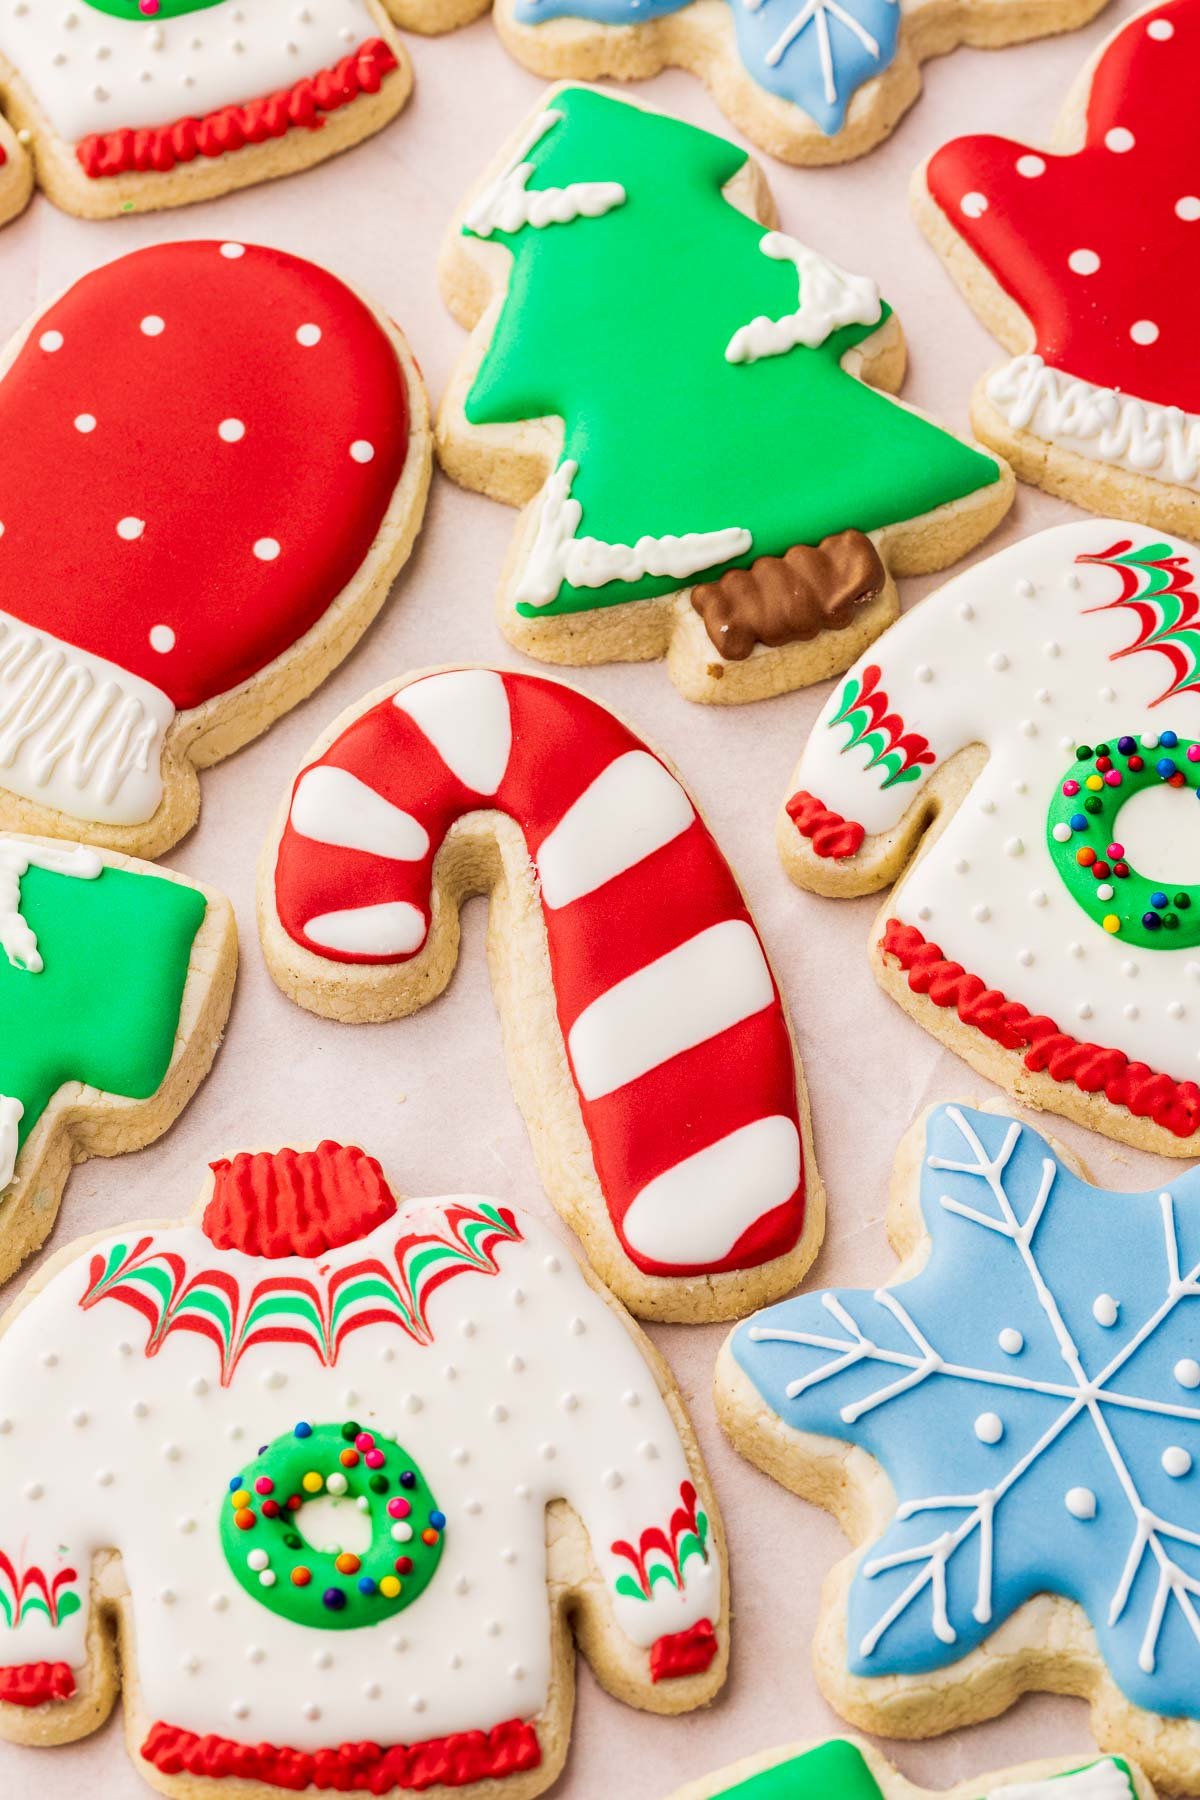 A close up of gluten free Christmas cut-out sugar cookies decorated as ugly Christmas sweaters, snowflakes, Christmas trees, candy canes and polka dot mittens.